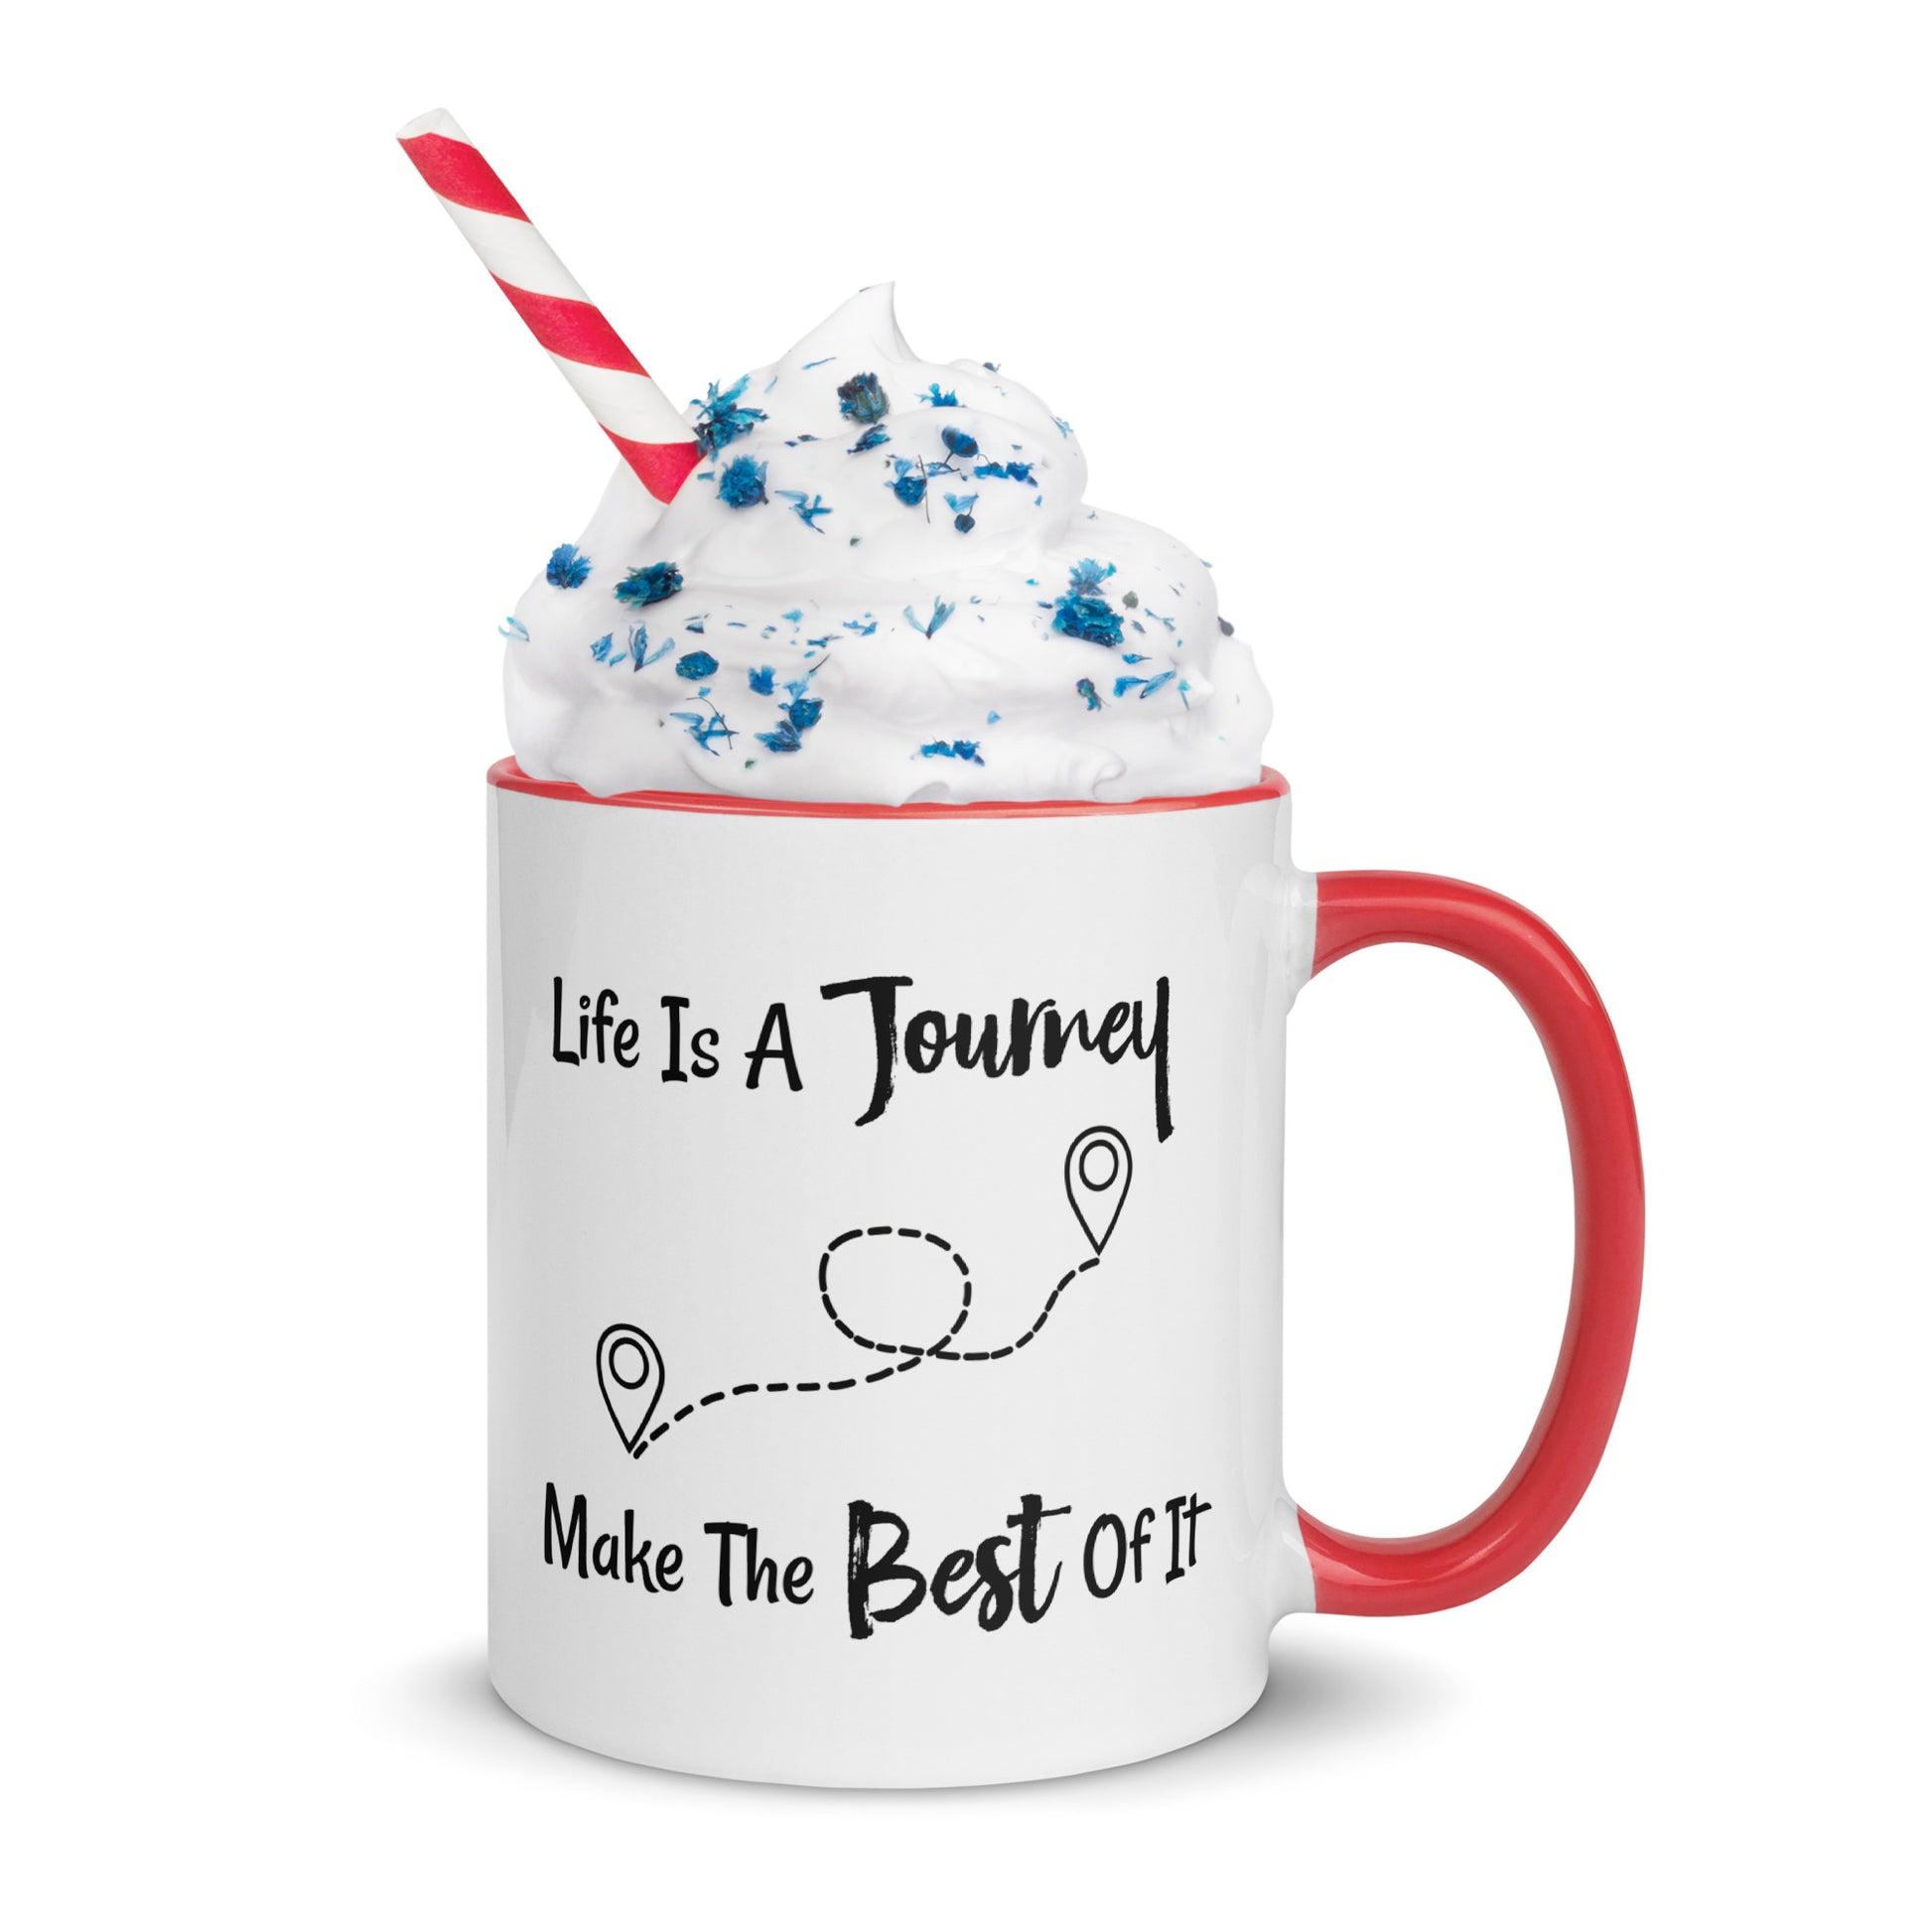 "Life Is A Journey, Make The Best Of It" Coffee Mug - Weave Got Gifts - Unique Gifts You Won’t Find Anywhere Else!